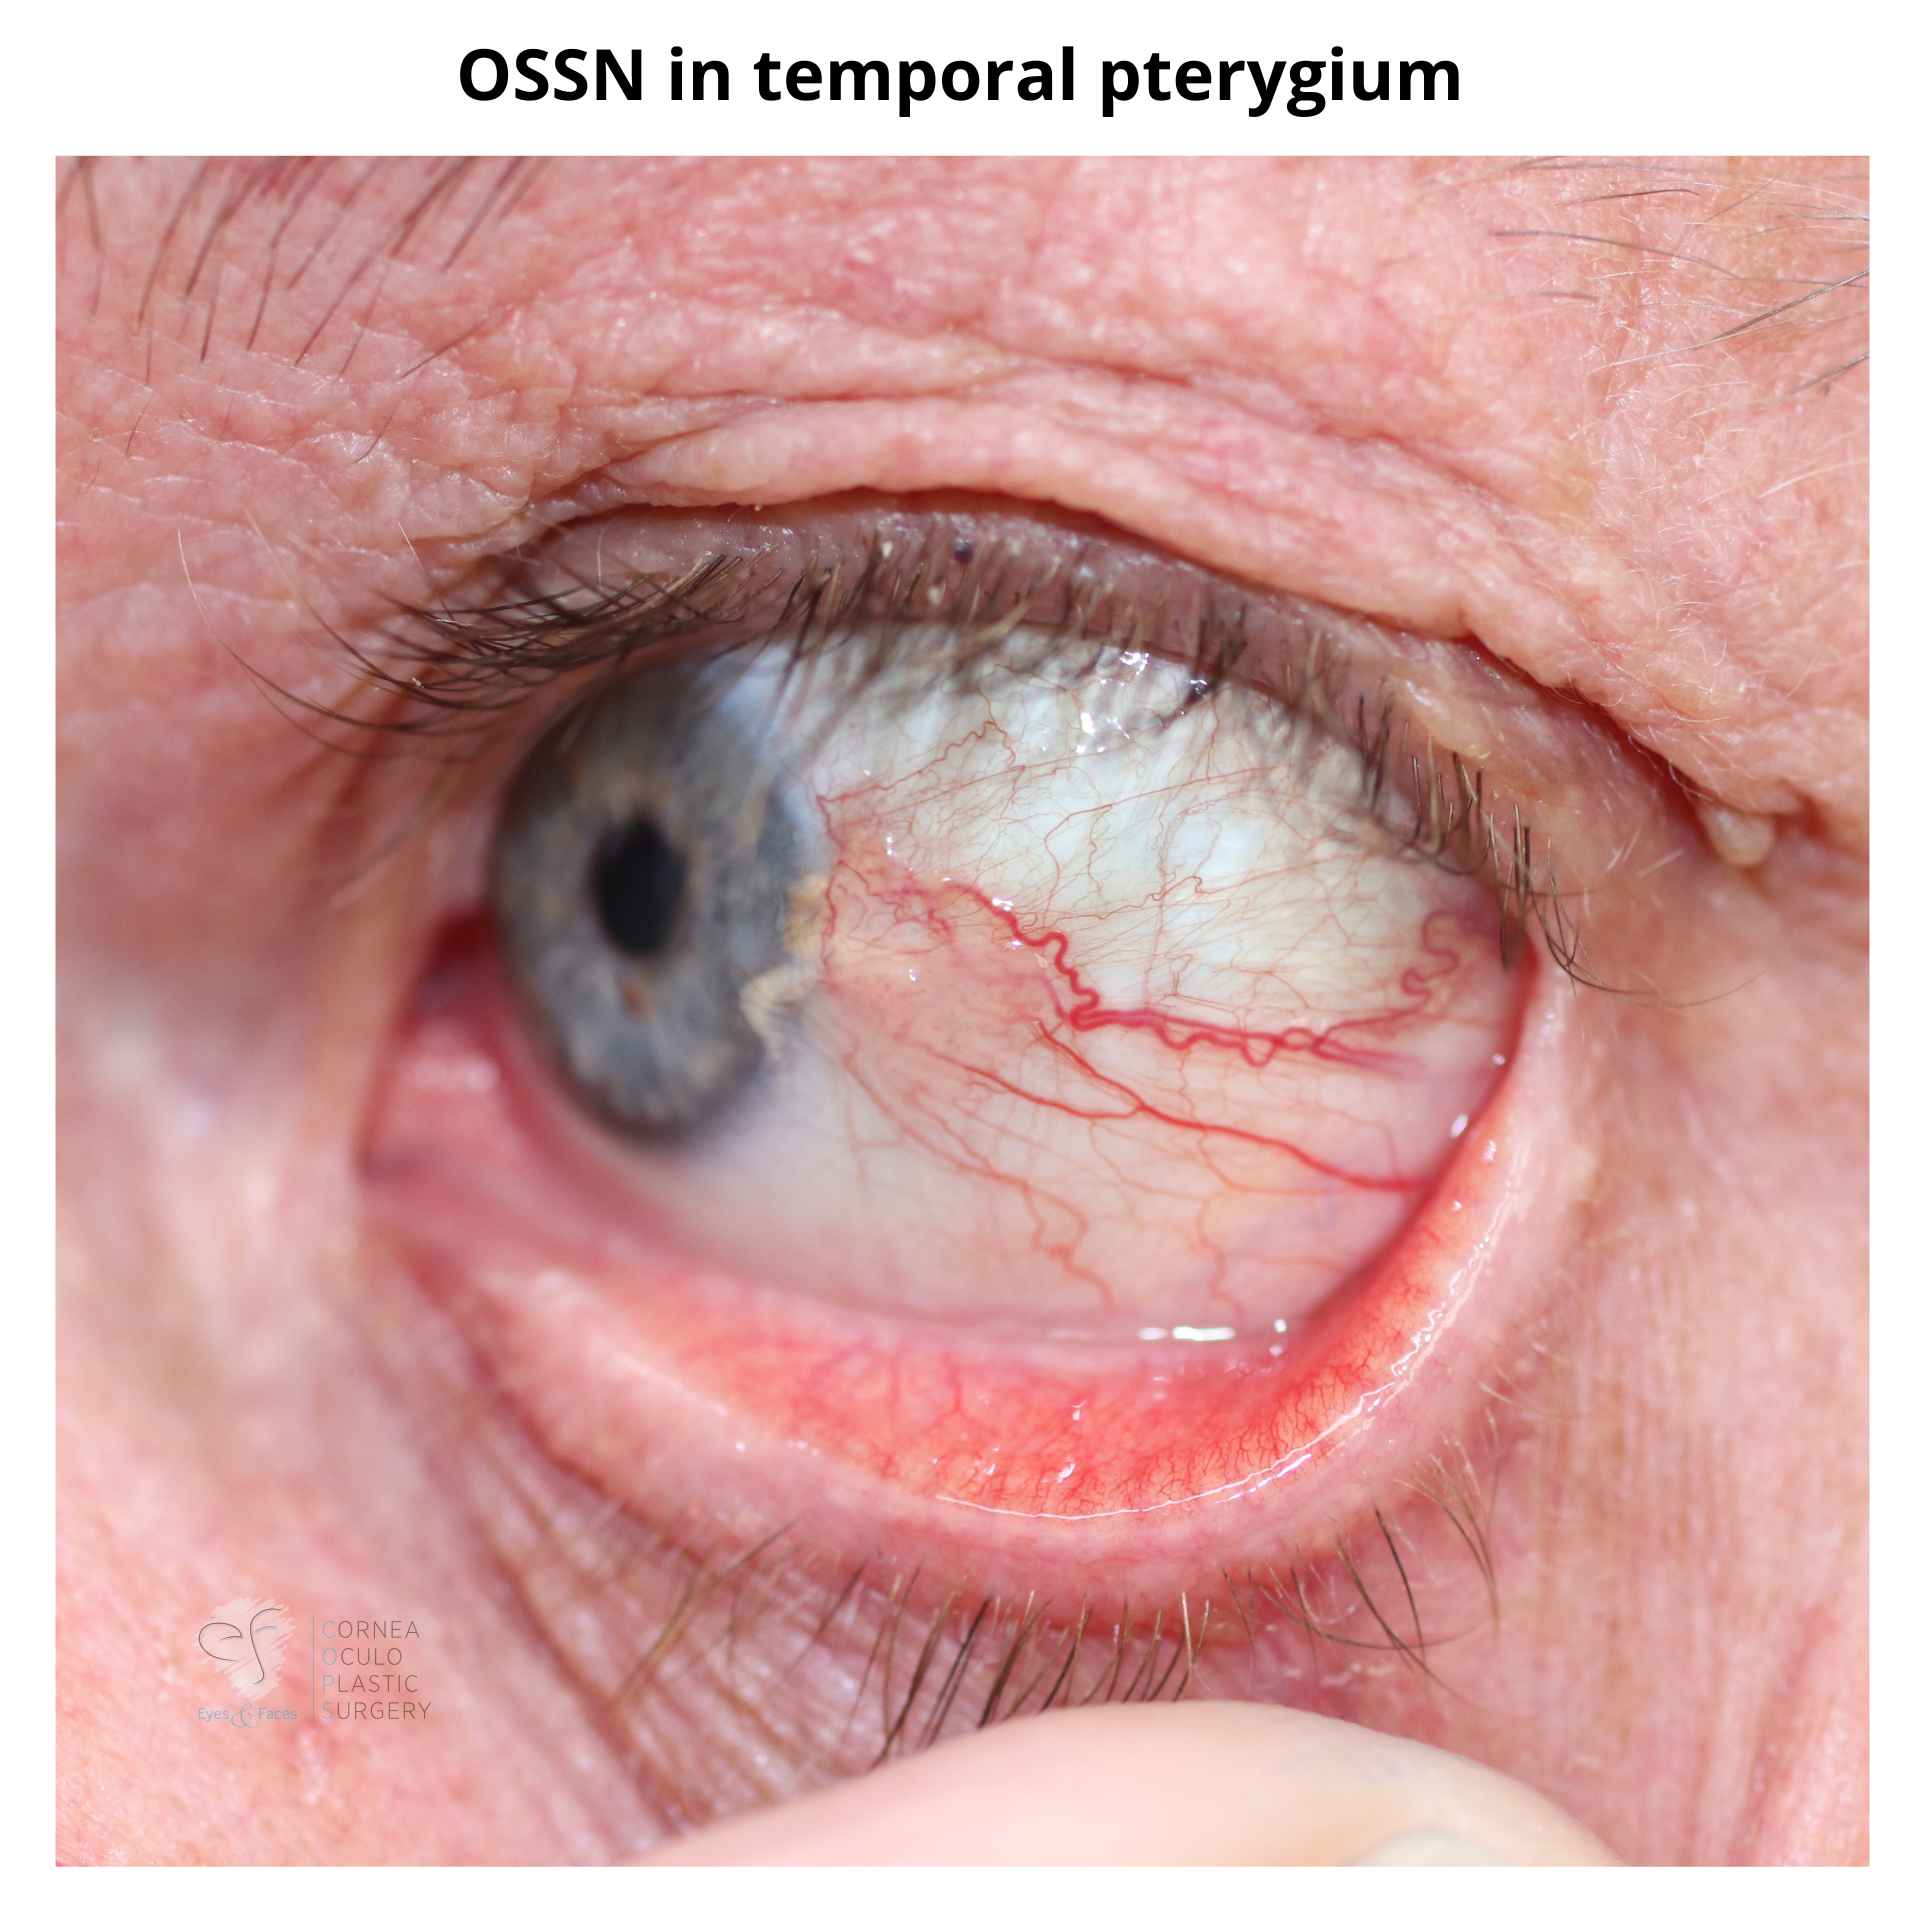 OSSN in temporal pterygium